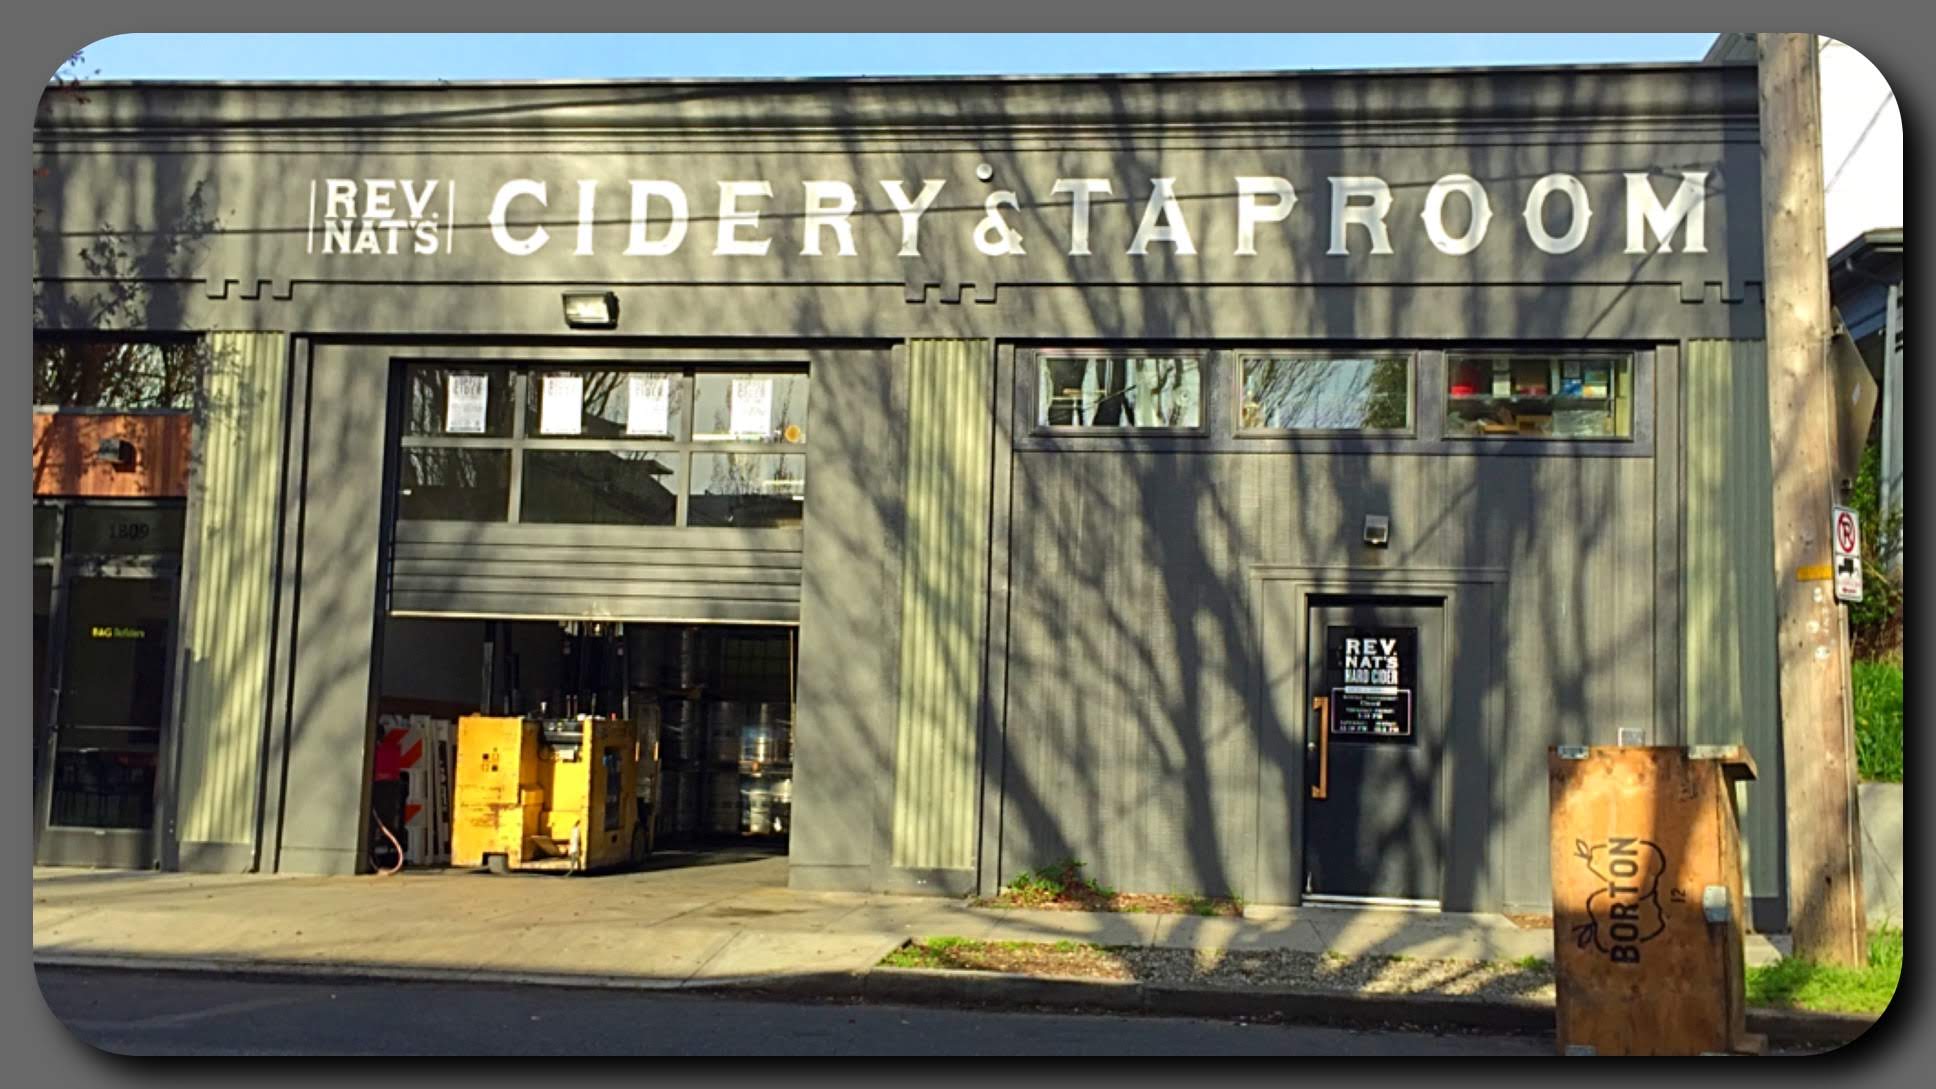 The exterior street view of a cidery and taproom.